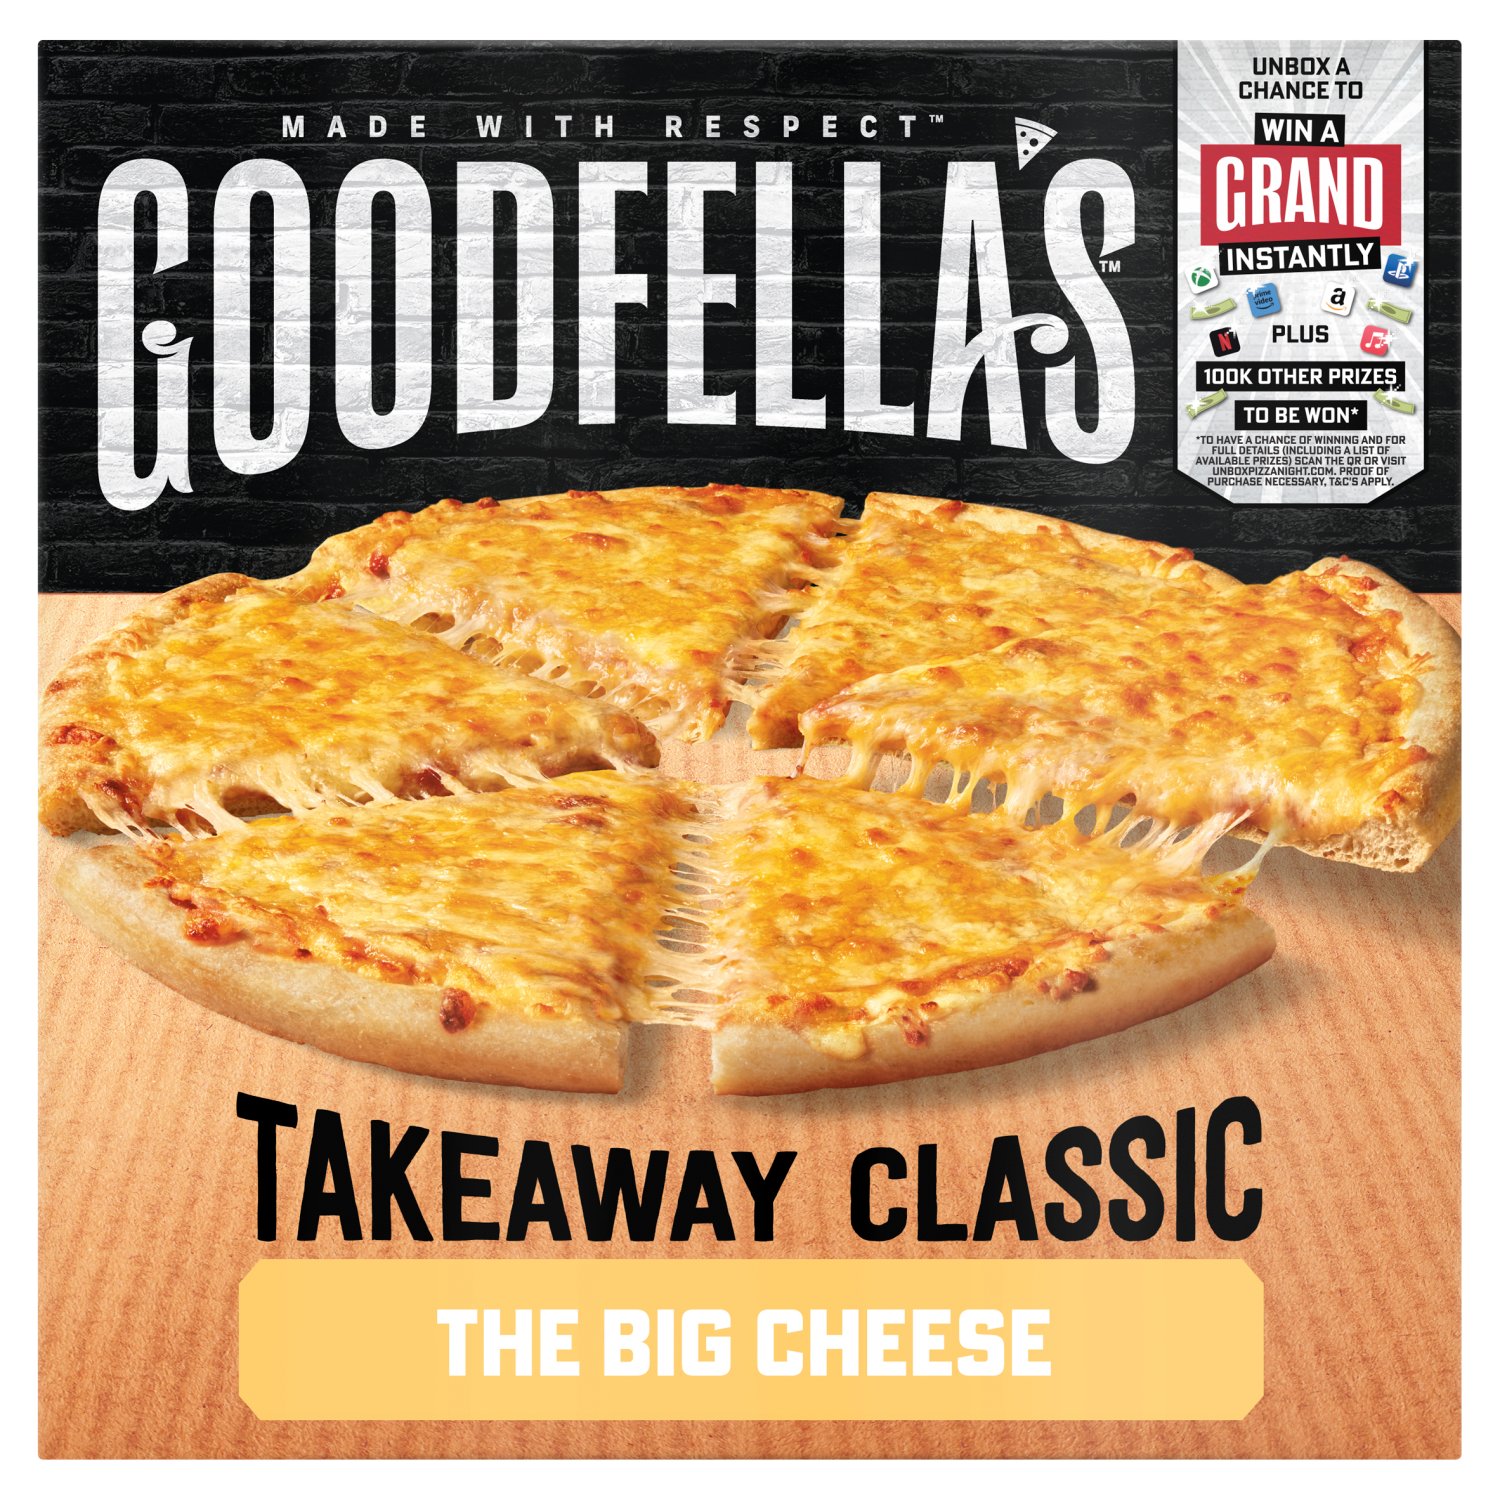 Introducing The Big Cheese Pizza - a takeaway classic that's all you could ever need. Packed with zesty, stretchy goodness, this three cheese pizza is hard to beat.

Goodfella's Cheese Pizza is stone baked for the perfect base, then topped with tomato sauce, and loaded with mouth-watering mozzarella, cheddar and red cheddar cheese.

Our takeaway pizzas are frozen quickly after baking to lock in the goodness. Simply put this frozen pizza in the oven and wait for a simple, easy dinner option the family will be excited for. More cheese? Yes please!

Welcome to the Neighbourhood
Here at Goodfella's we are passionate about pizza, from the dough that has been rested, then baked on Italian stone for a crispy base to our signature tomato sauces.
Our pizzas are immediately frozen to lock in that great taste.This delicious Takeaway Cheese Pizza is no exception! Italian American style pizza from the Goodfella's family.